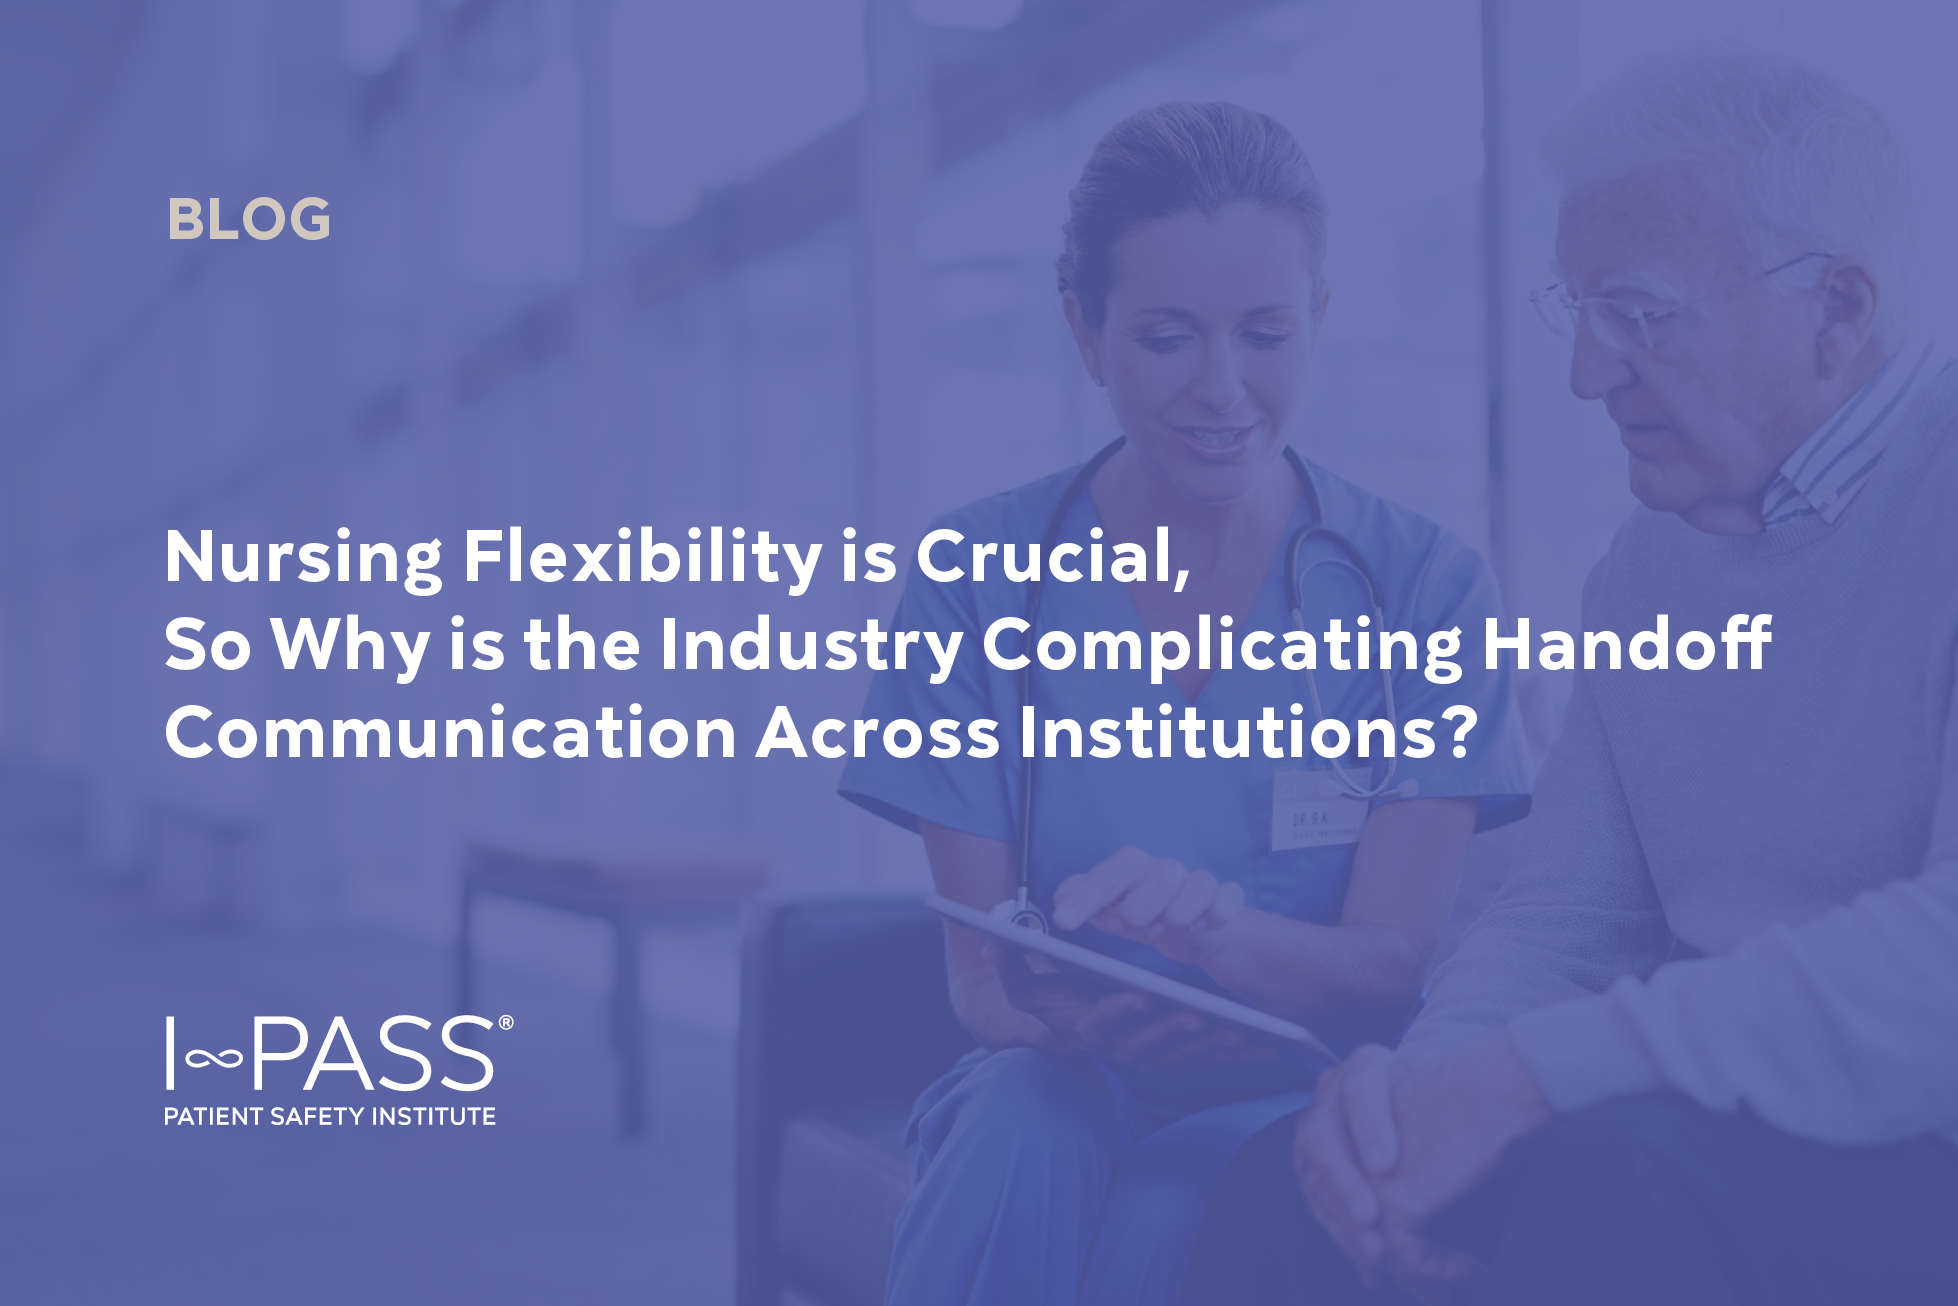 Nursing Flexibility is Crucial, So Why is the Industry Complicating Handoff Communication Across Institutions?